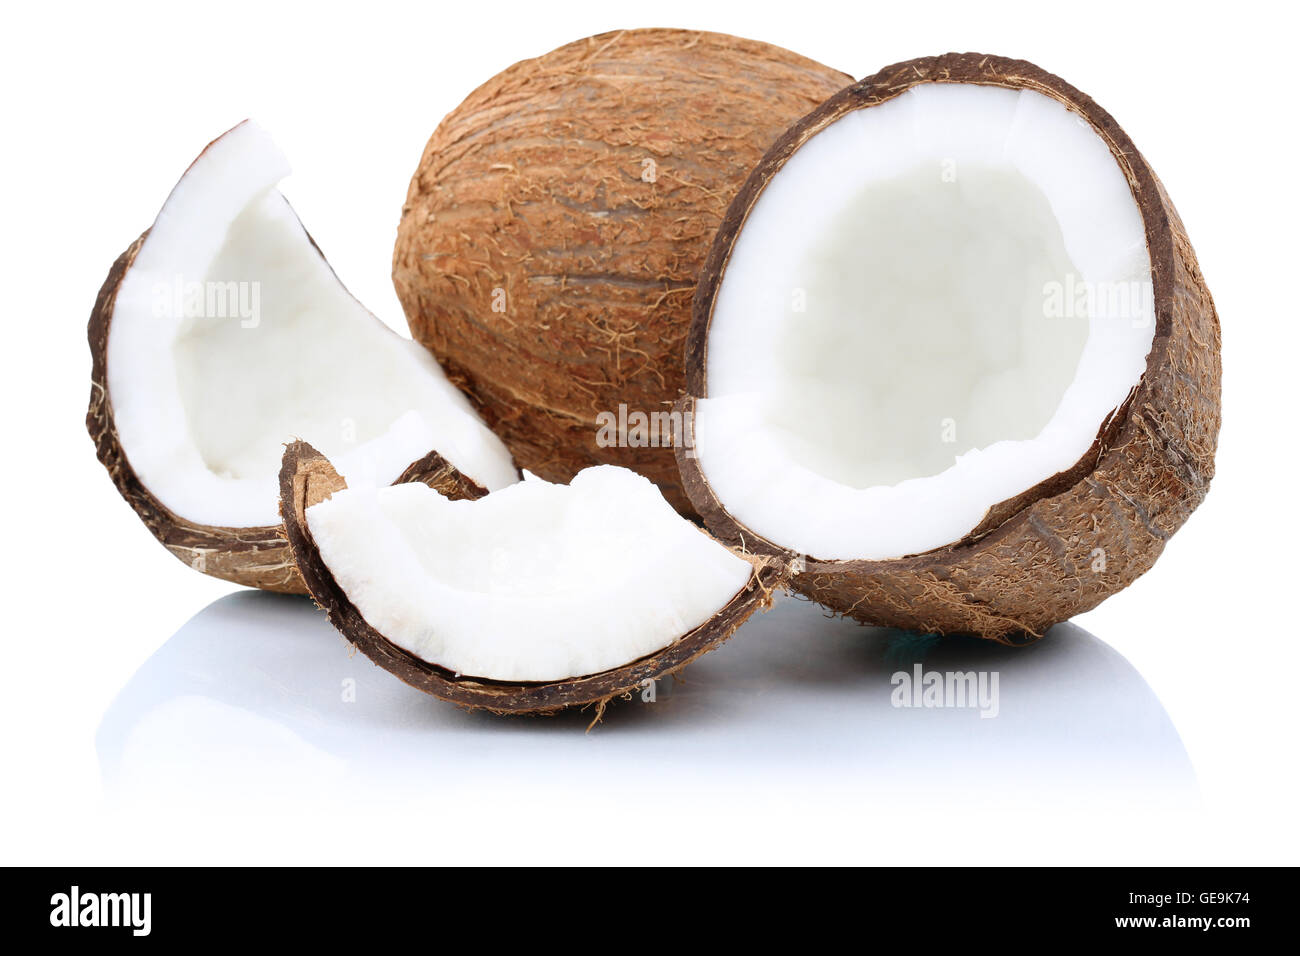 Coconut coconuts fruit sliced portion fruits isolated on a white background Stock Photo